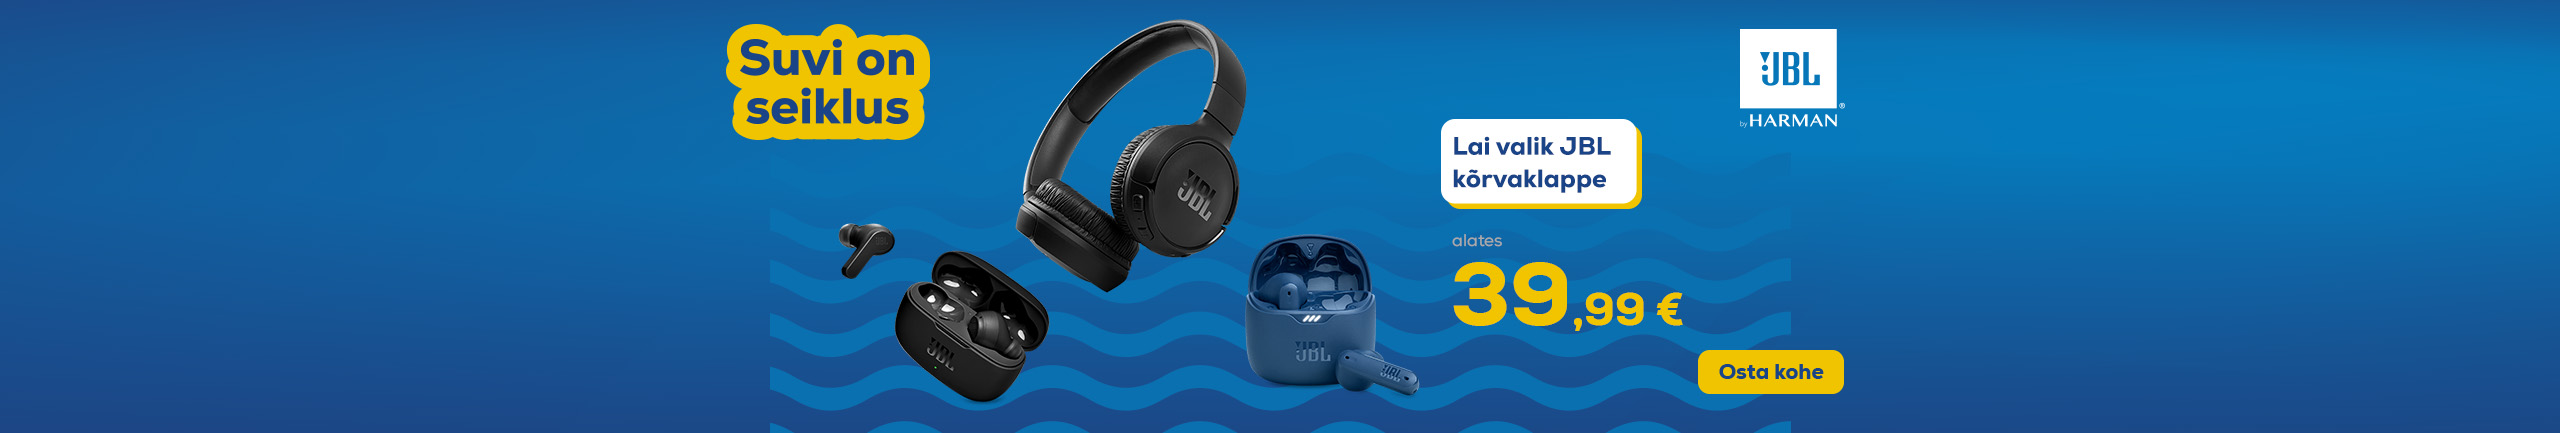 Summer is an adventure! A wide selection of JBL headphones from €39.99